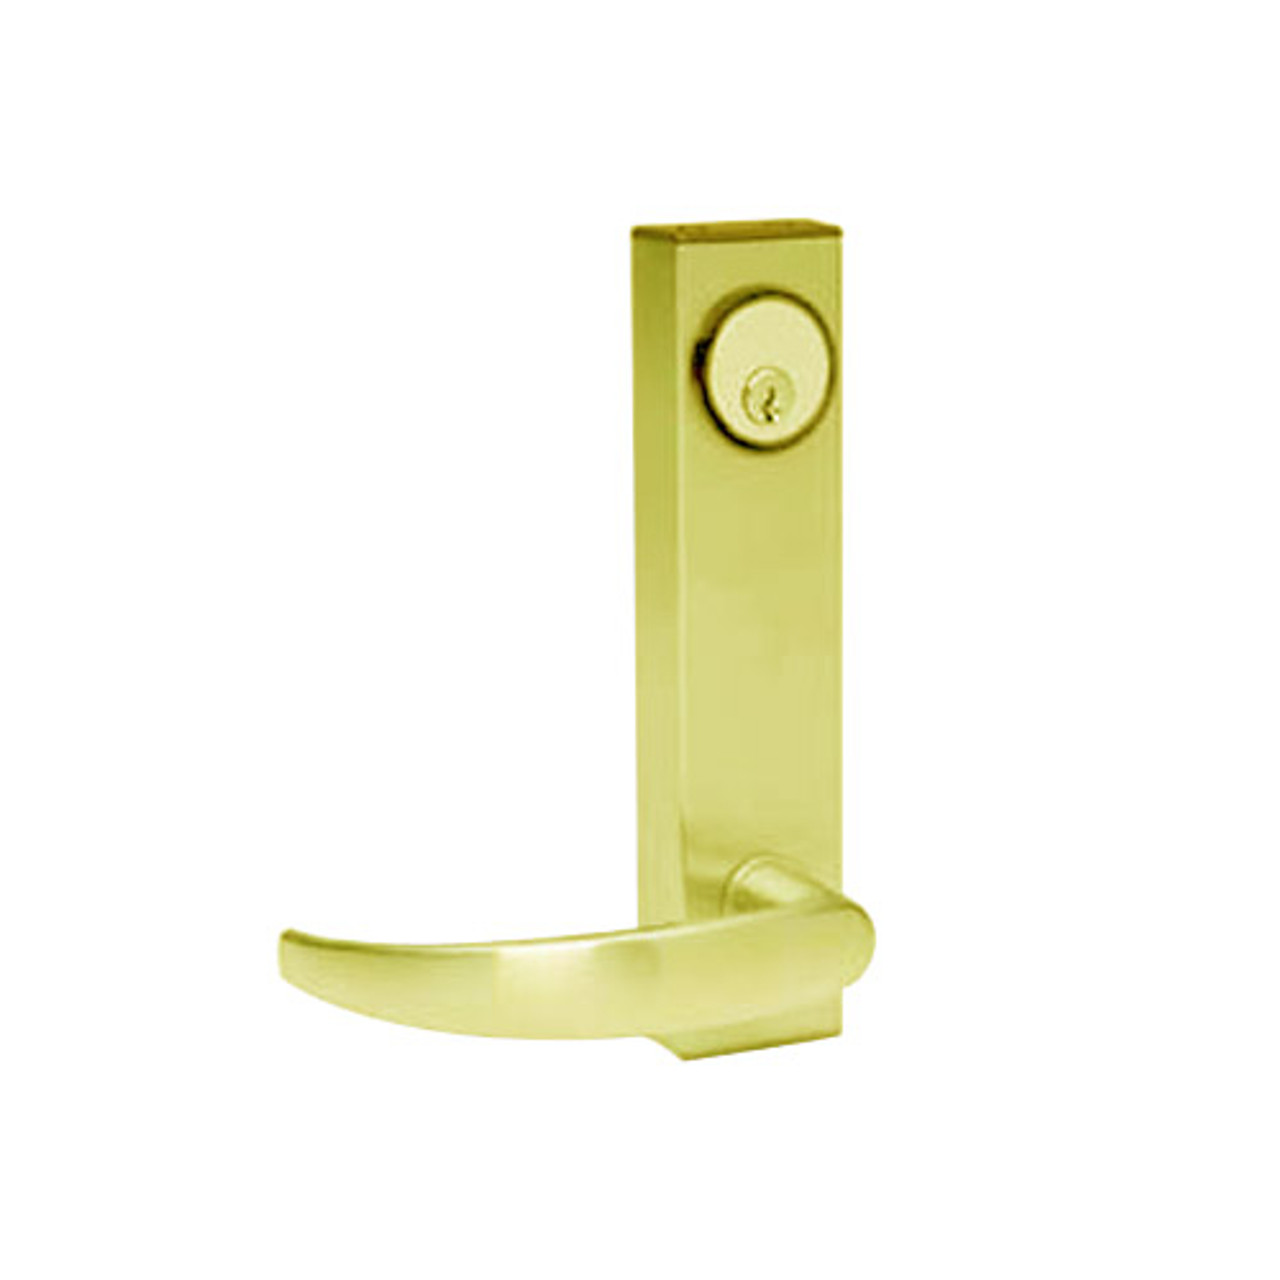 3080-01-0-33-US3 Adams Rite Standard Entry Trim with Curve Lever in Bright Brass Finish